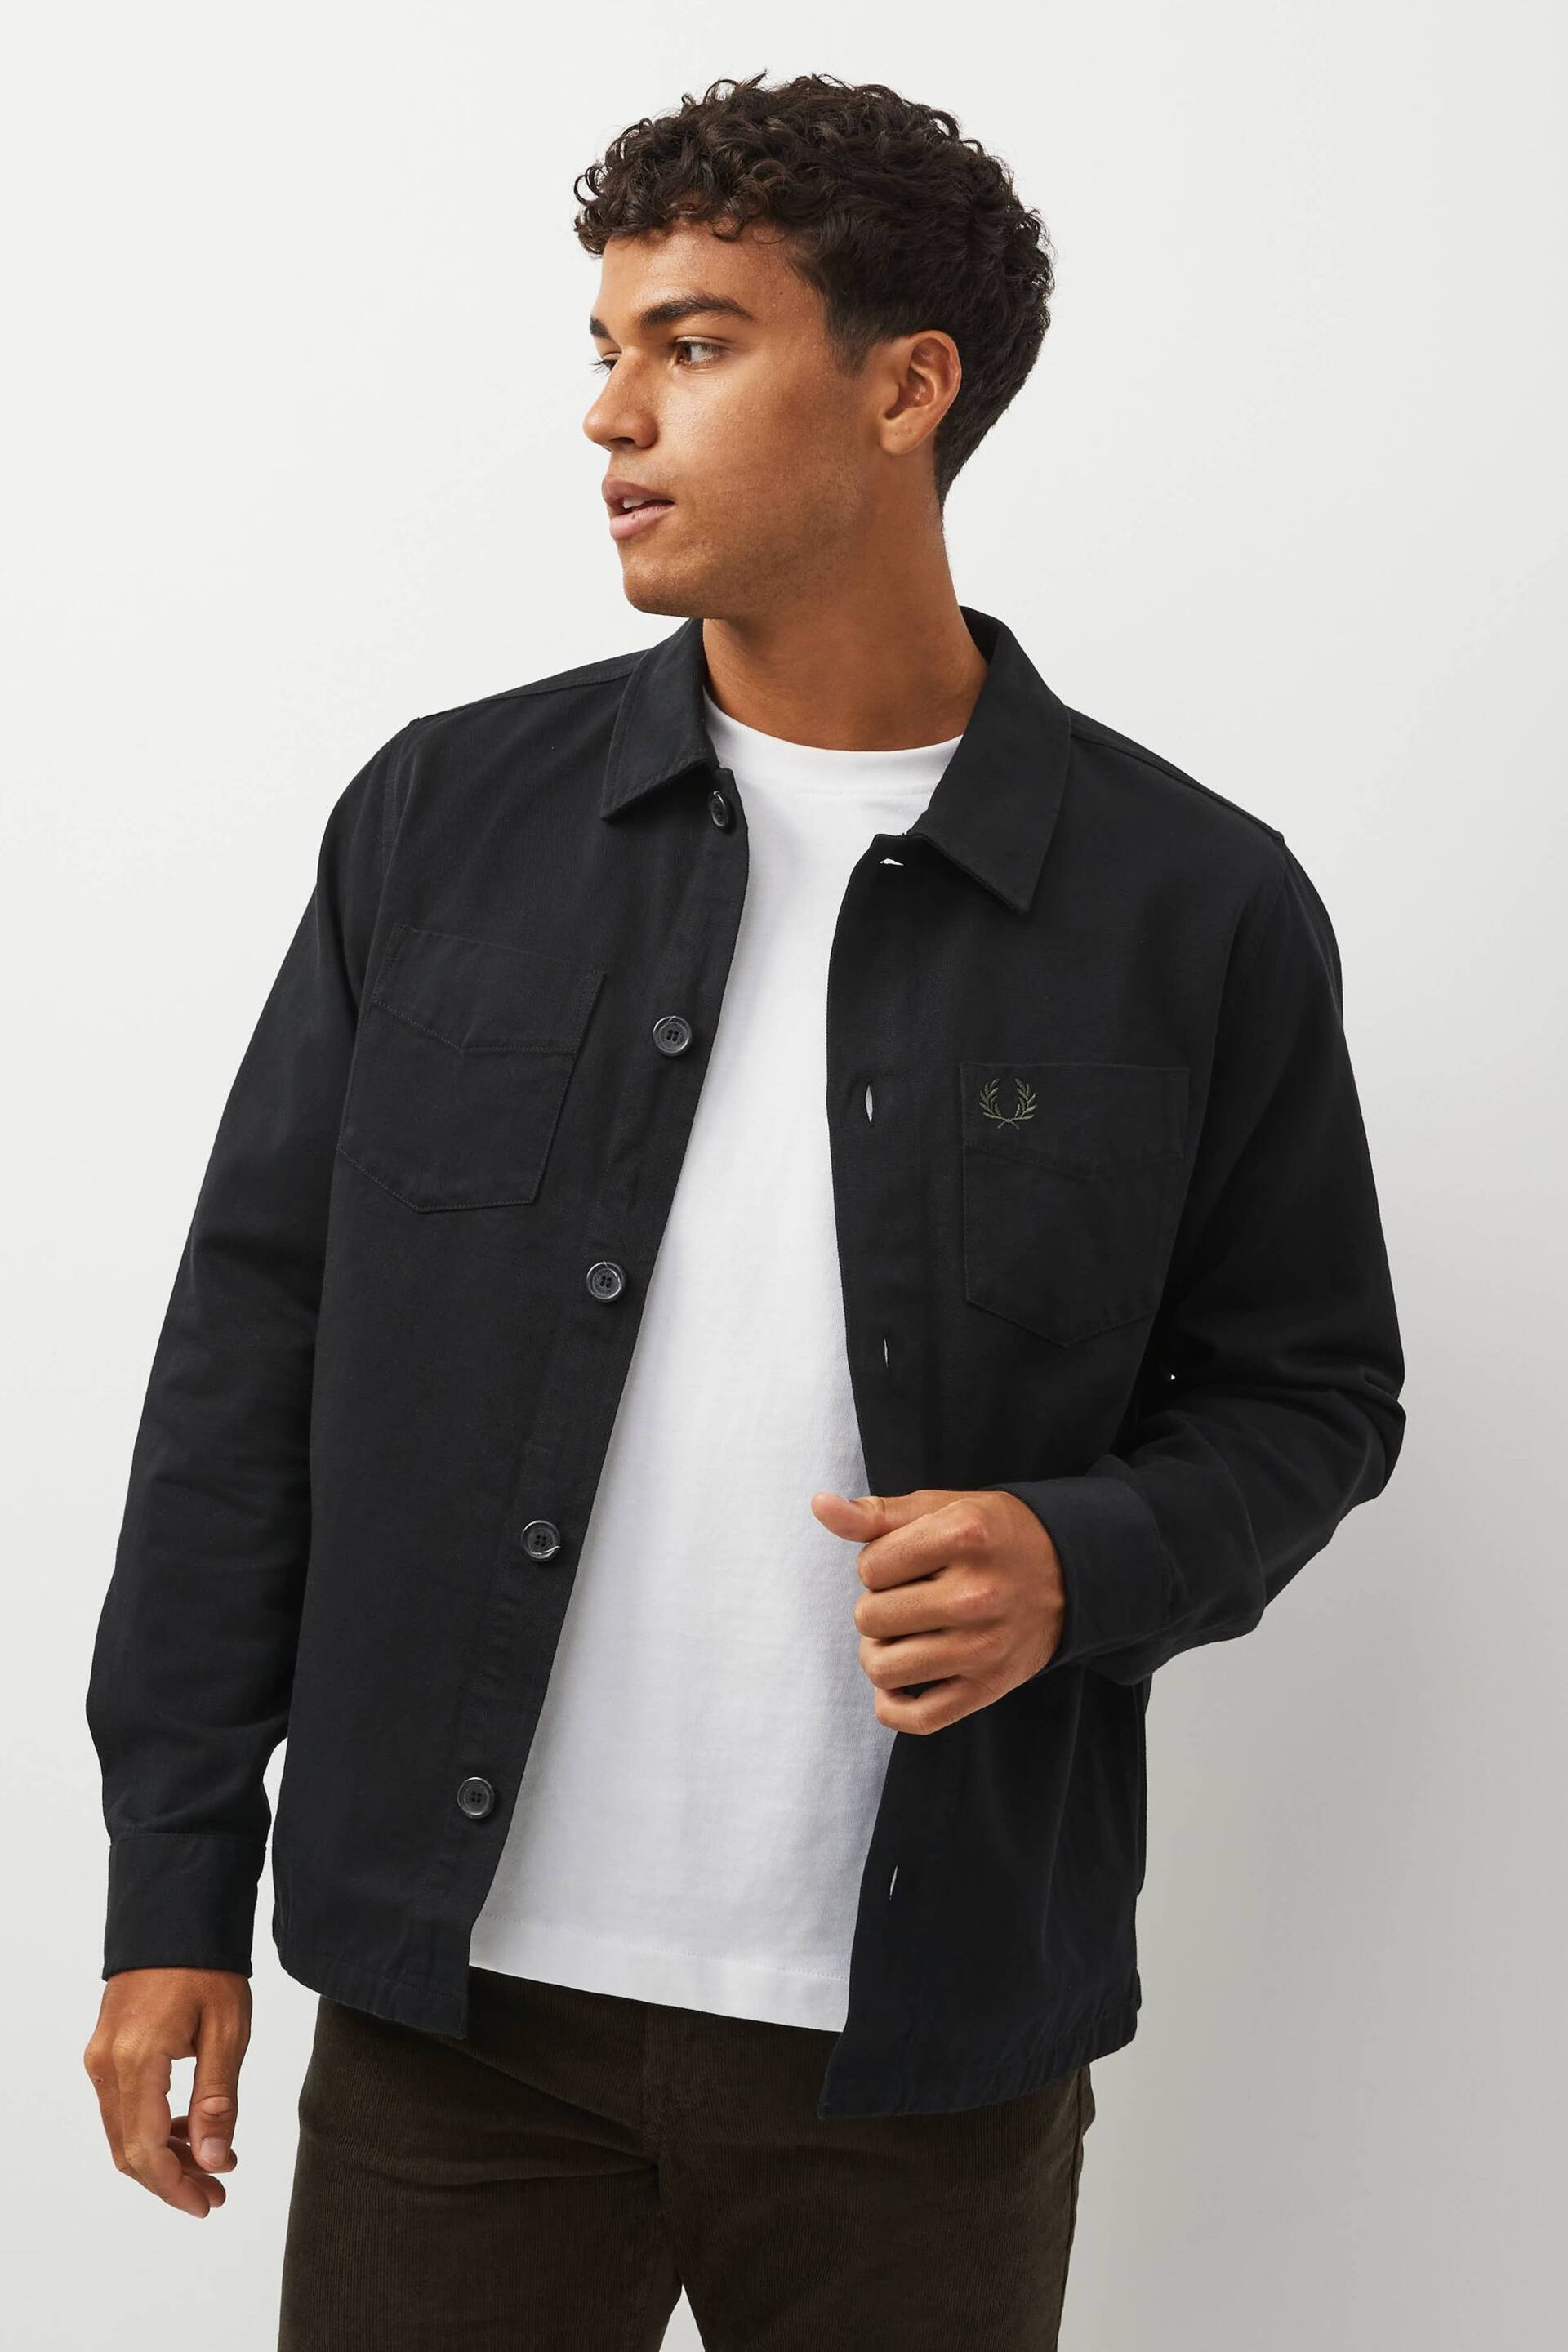 Fred Perry Black Twill Shacket Overshirt - Image 1 of 9